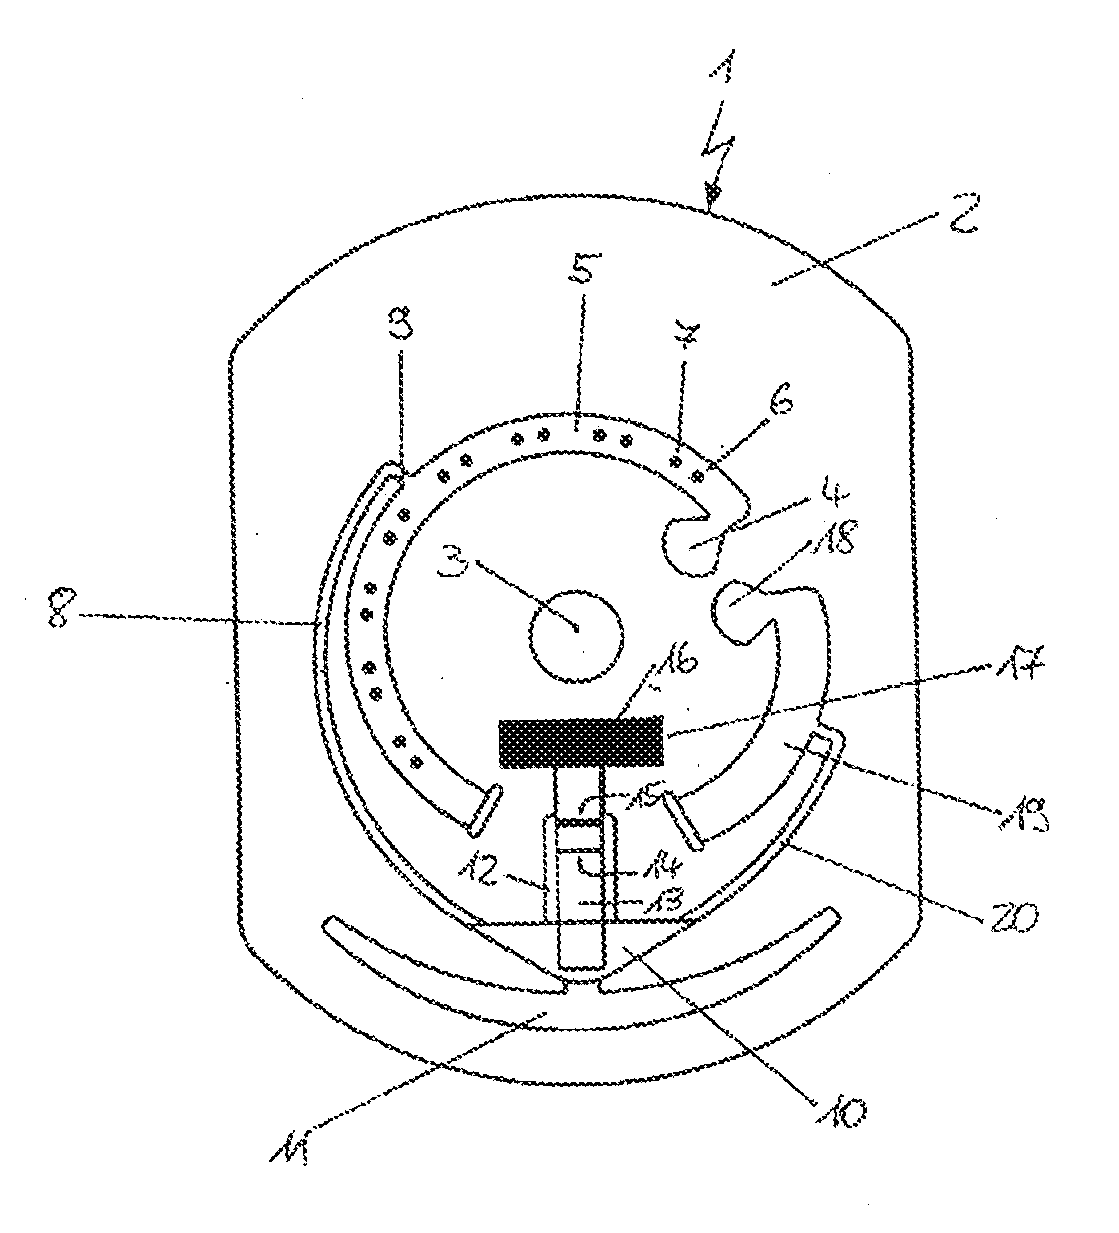 Test Element Having Combined Control and Calibration Zone